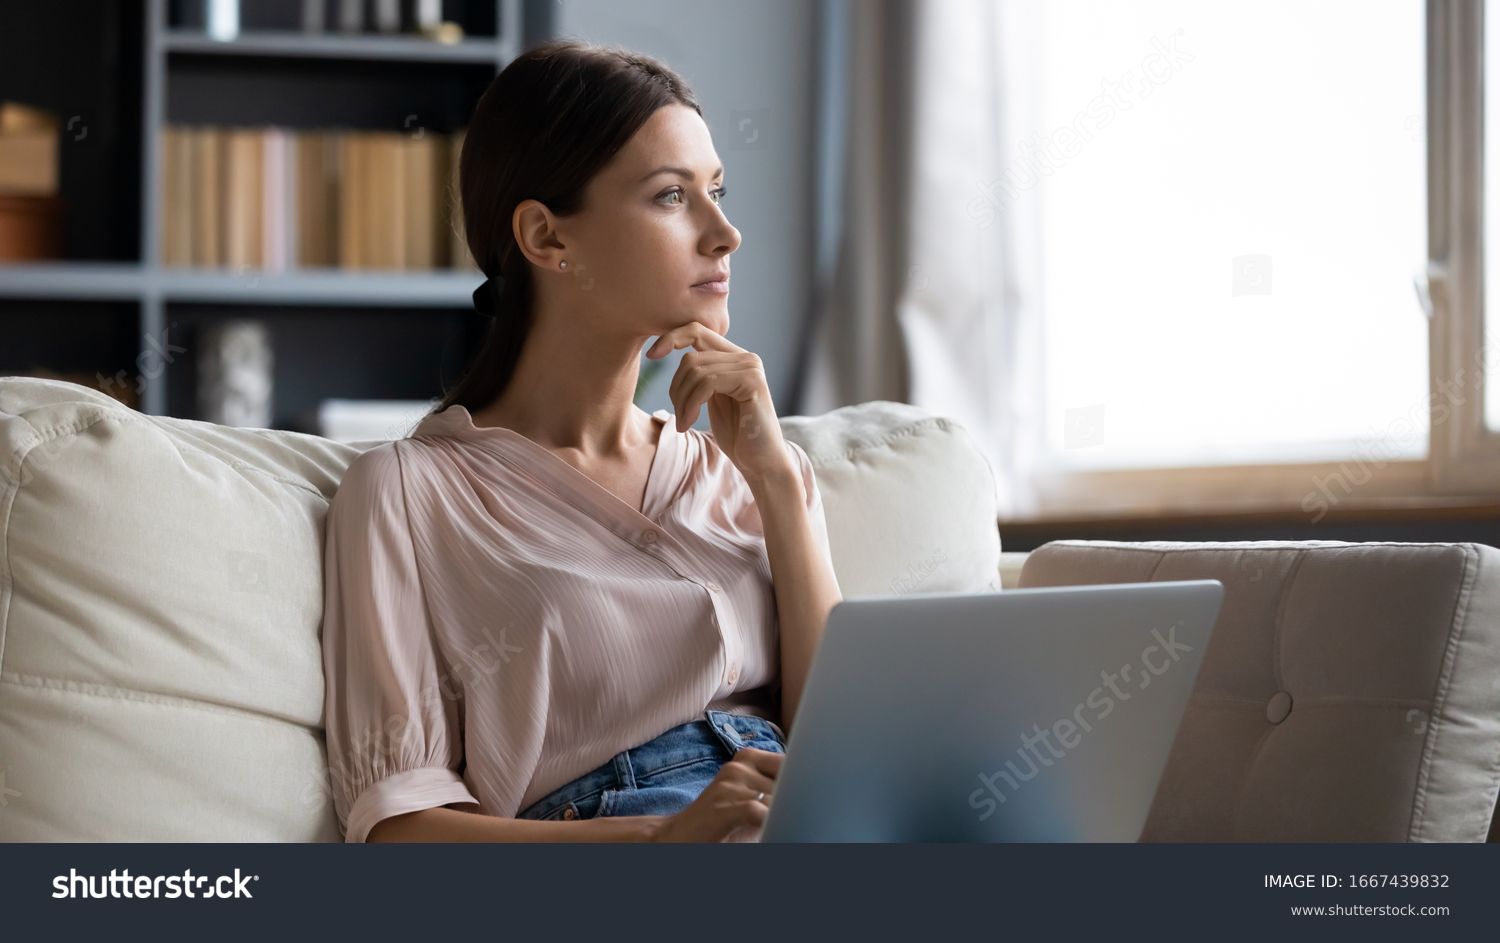 Distracted from work worried young woman sitting on couch with laptop, thinking of problems. Pensive unmotivated lady looking at window, feeling lack of energy, doing remote freelance tasks at home. #1667439832